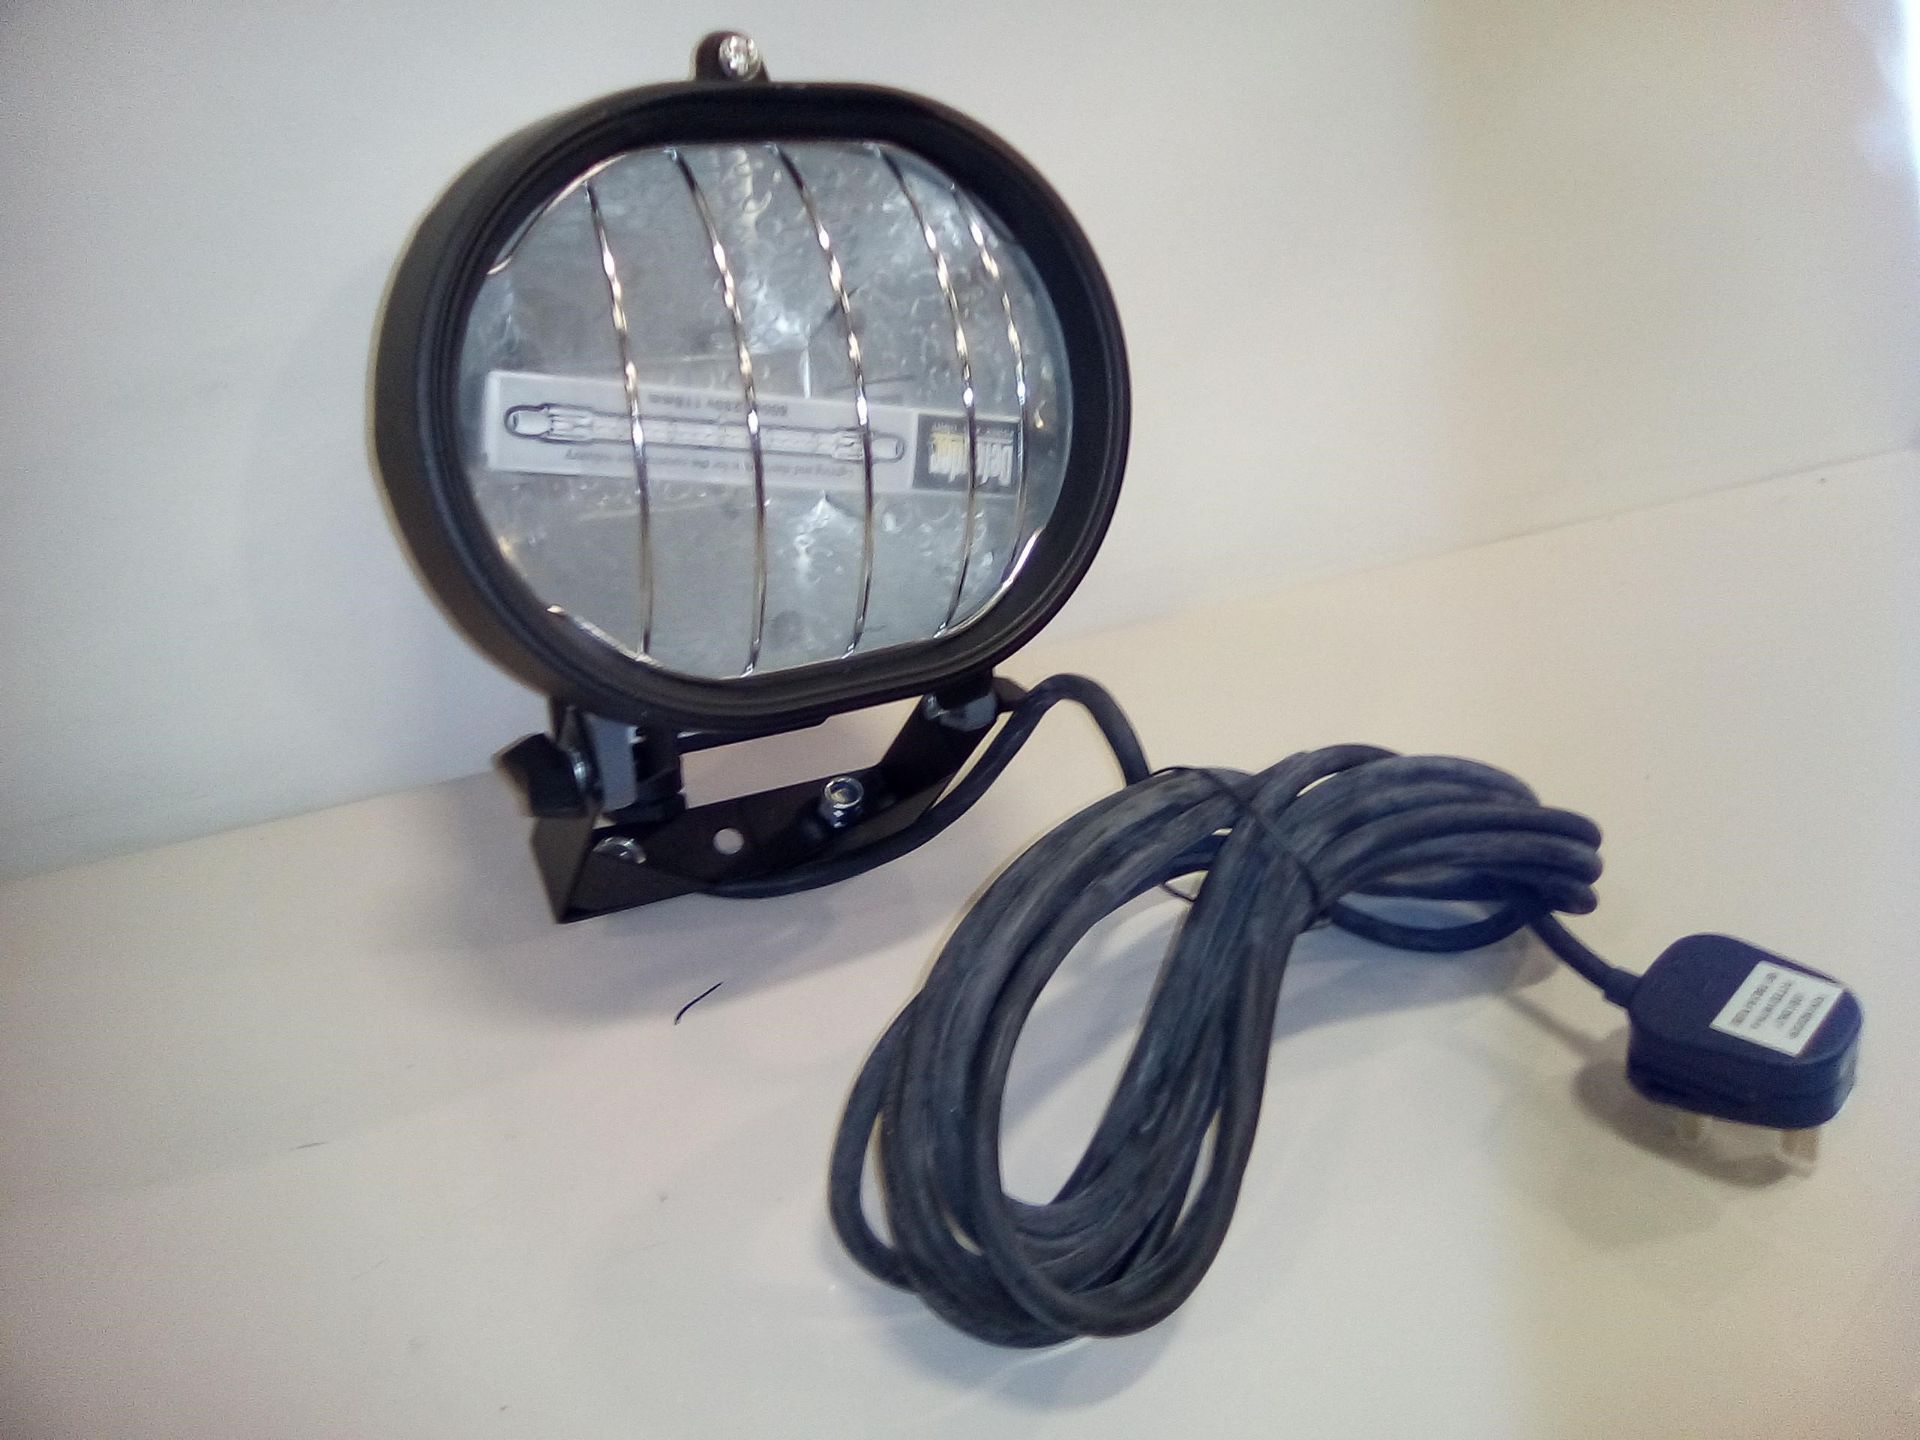 10 X BRAND NEW DEFENDER 240V HALOGEN HEAD PORTABLE SITE LAMP / WORKLIGHT WITH 5M CABLE, 13A PLUG (